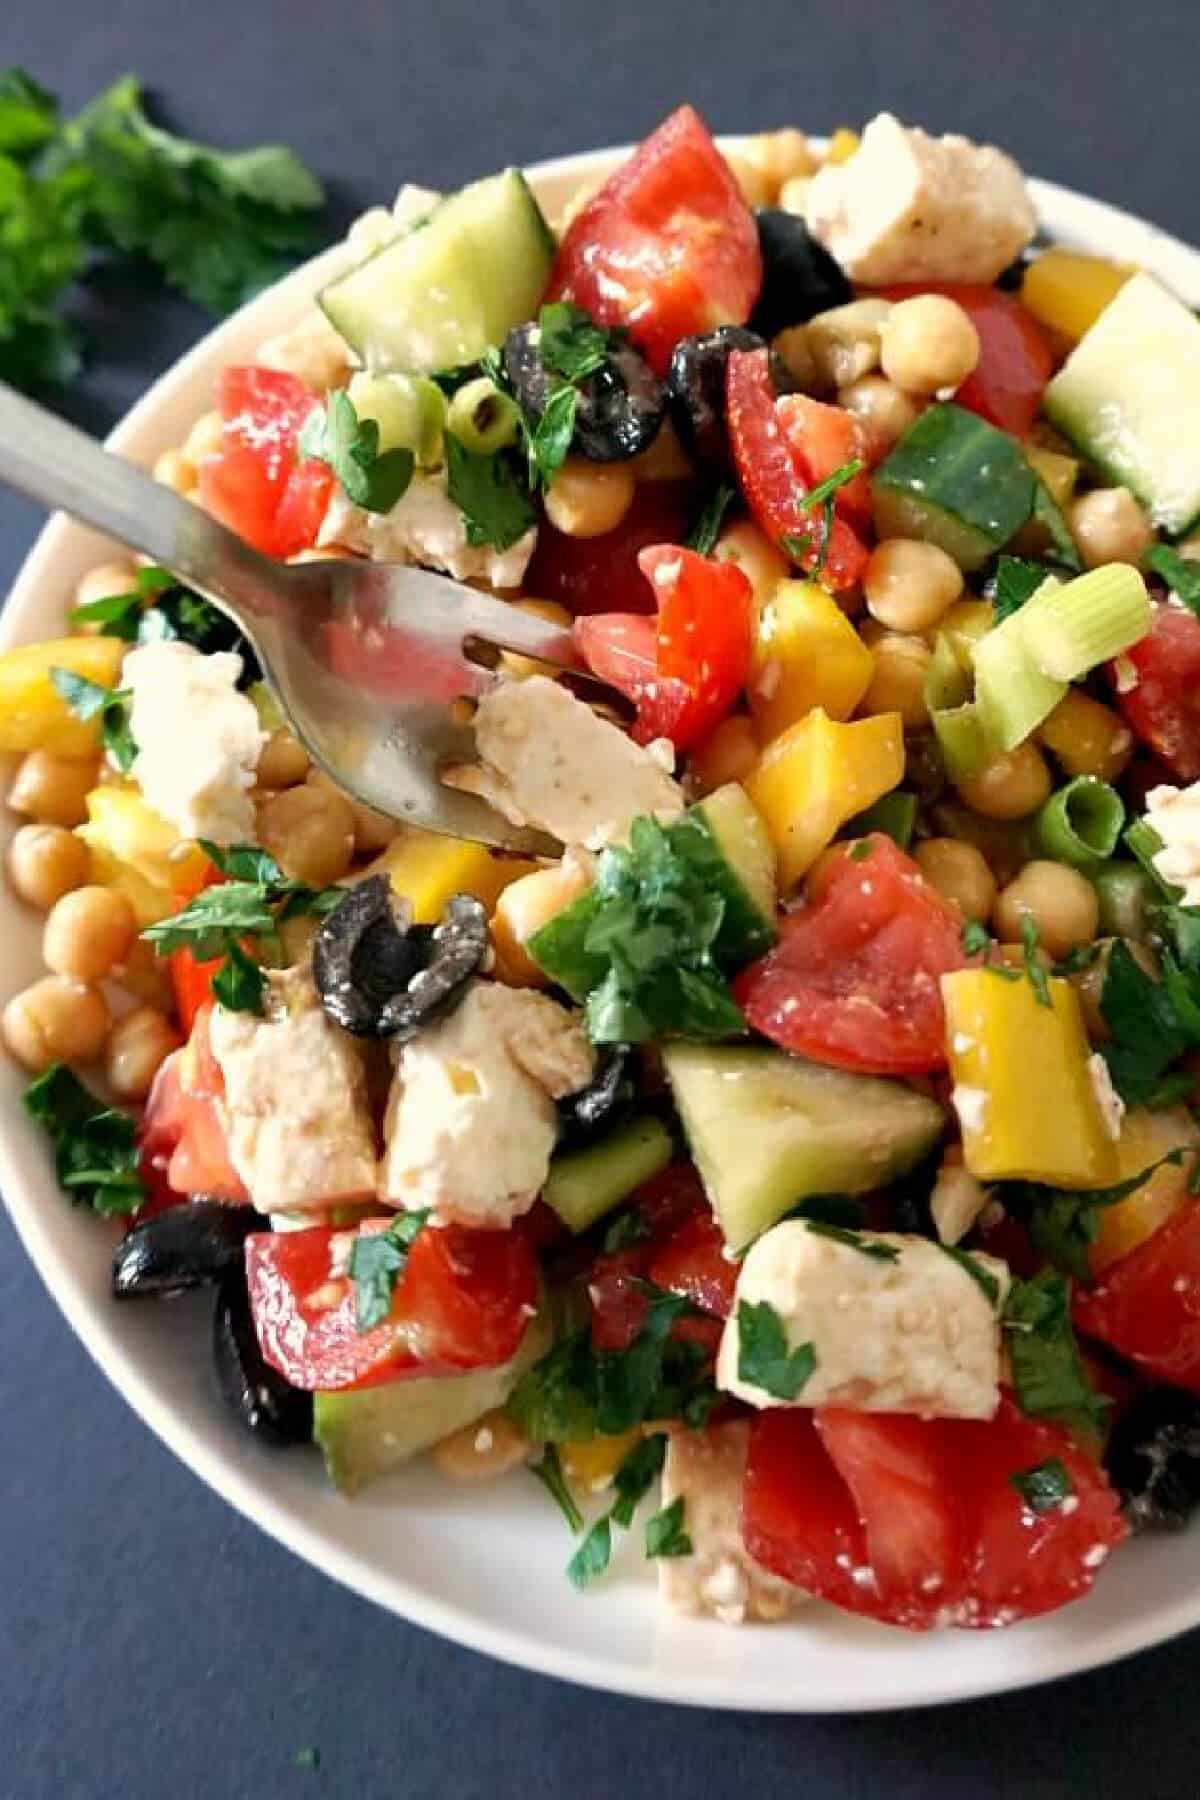 A chickpea and veggie salad in a white bowl.